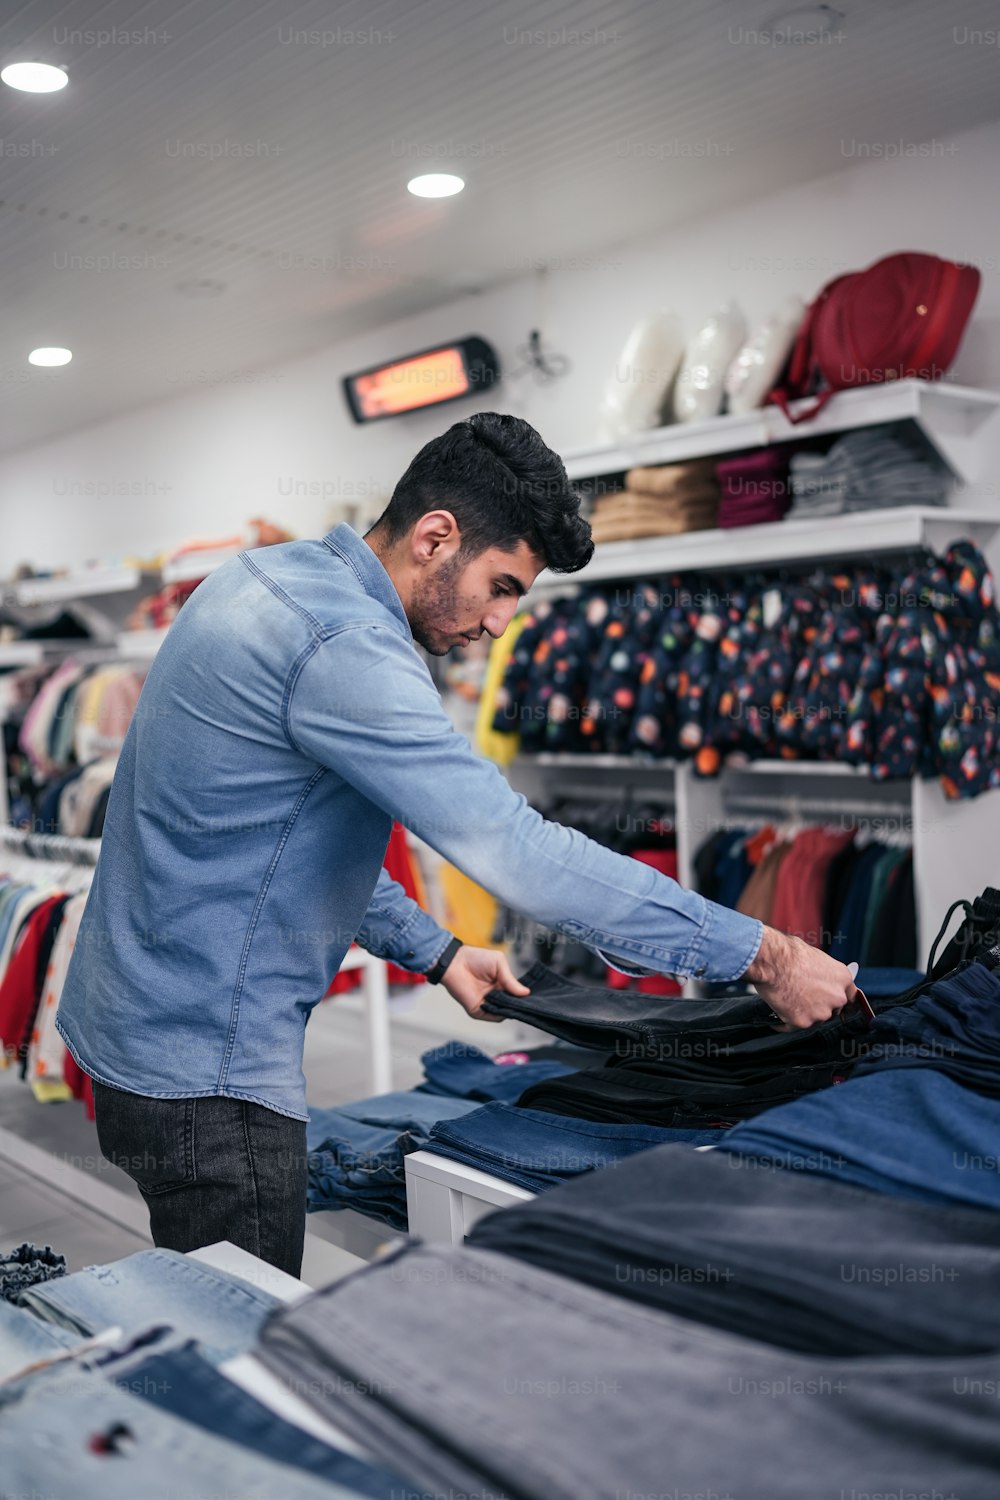 a man ironing clothes in a clothing store